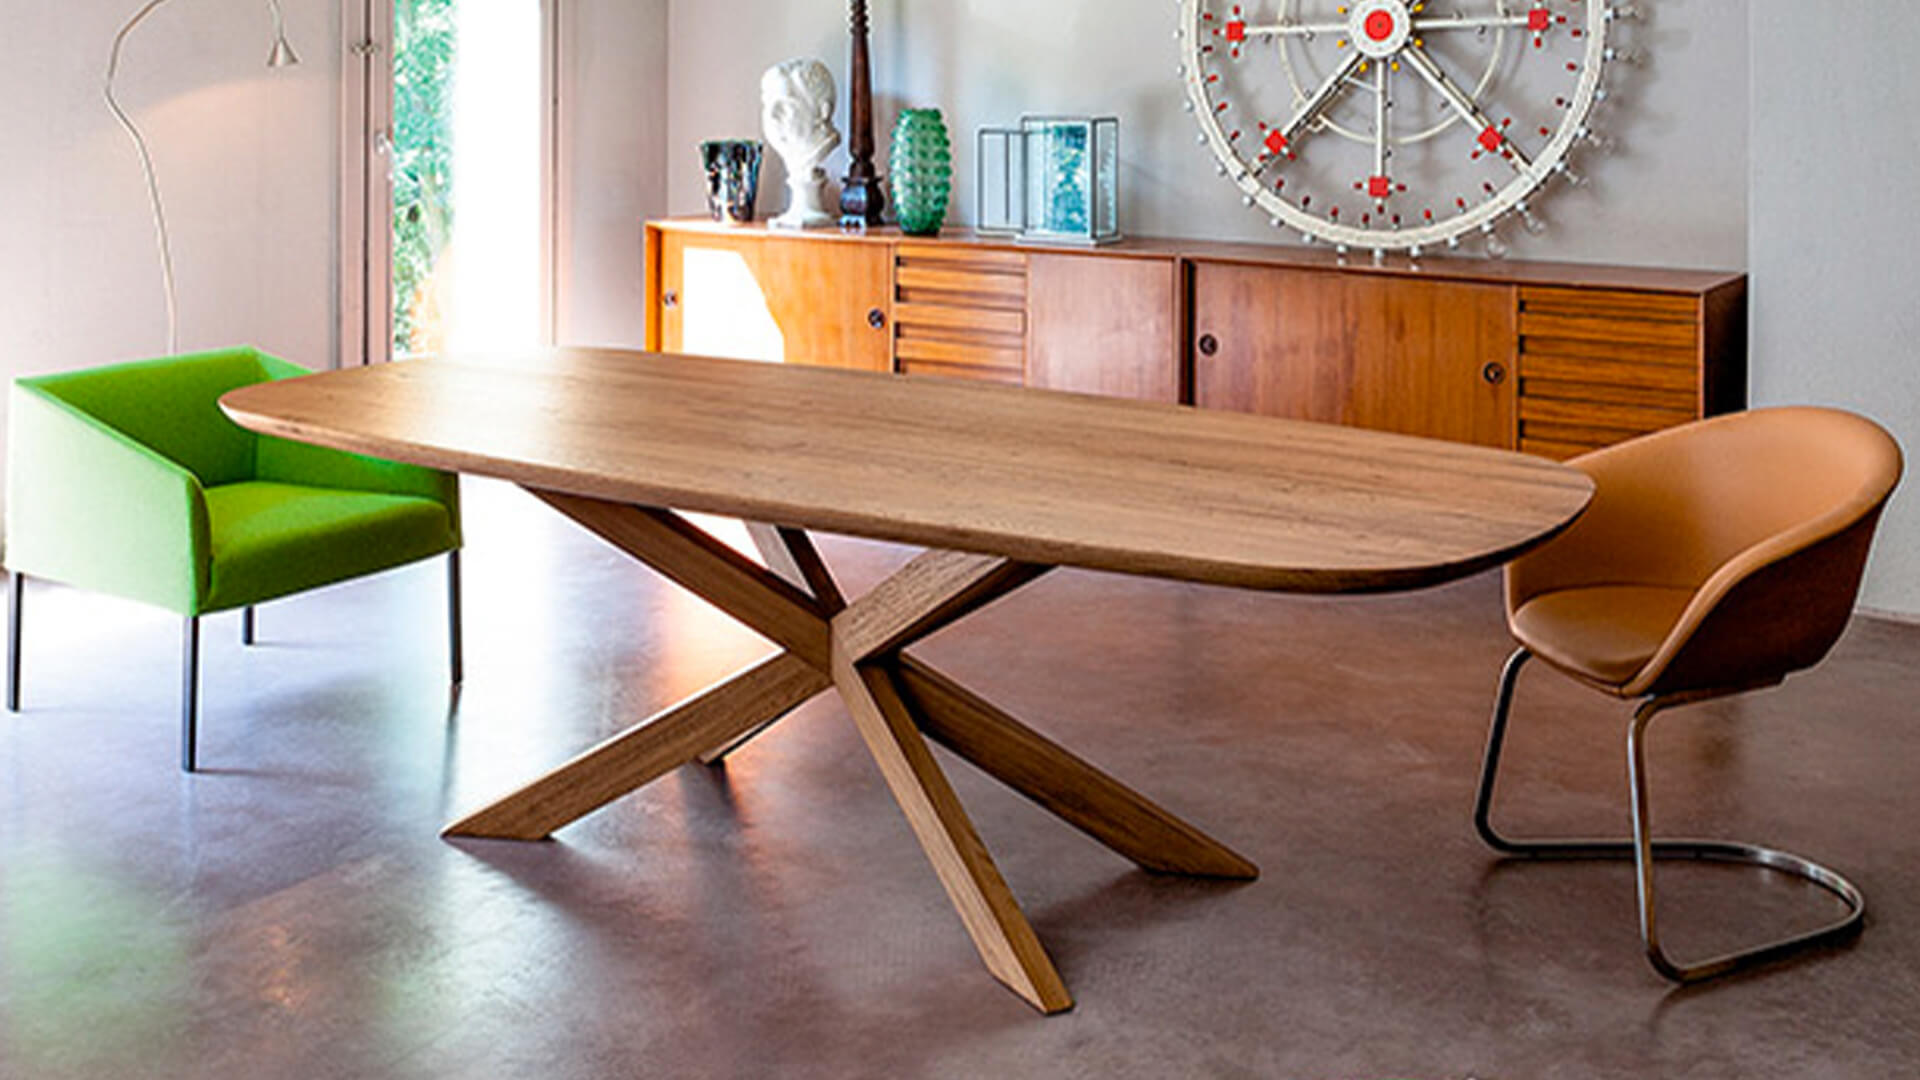 Blog IDW - How to choose a dining table